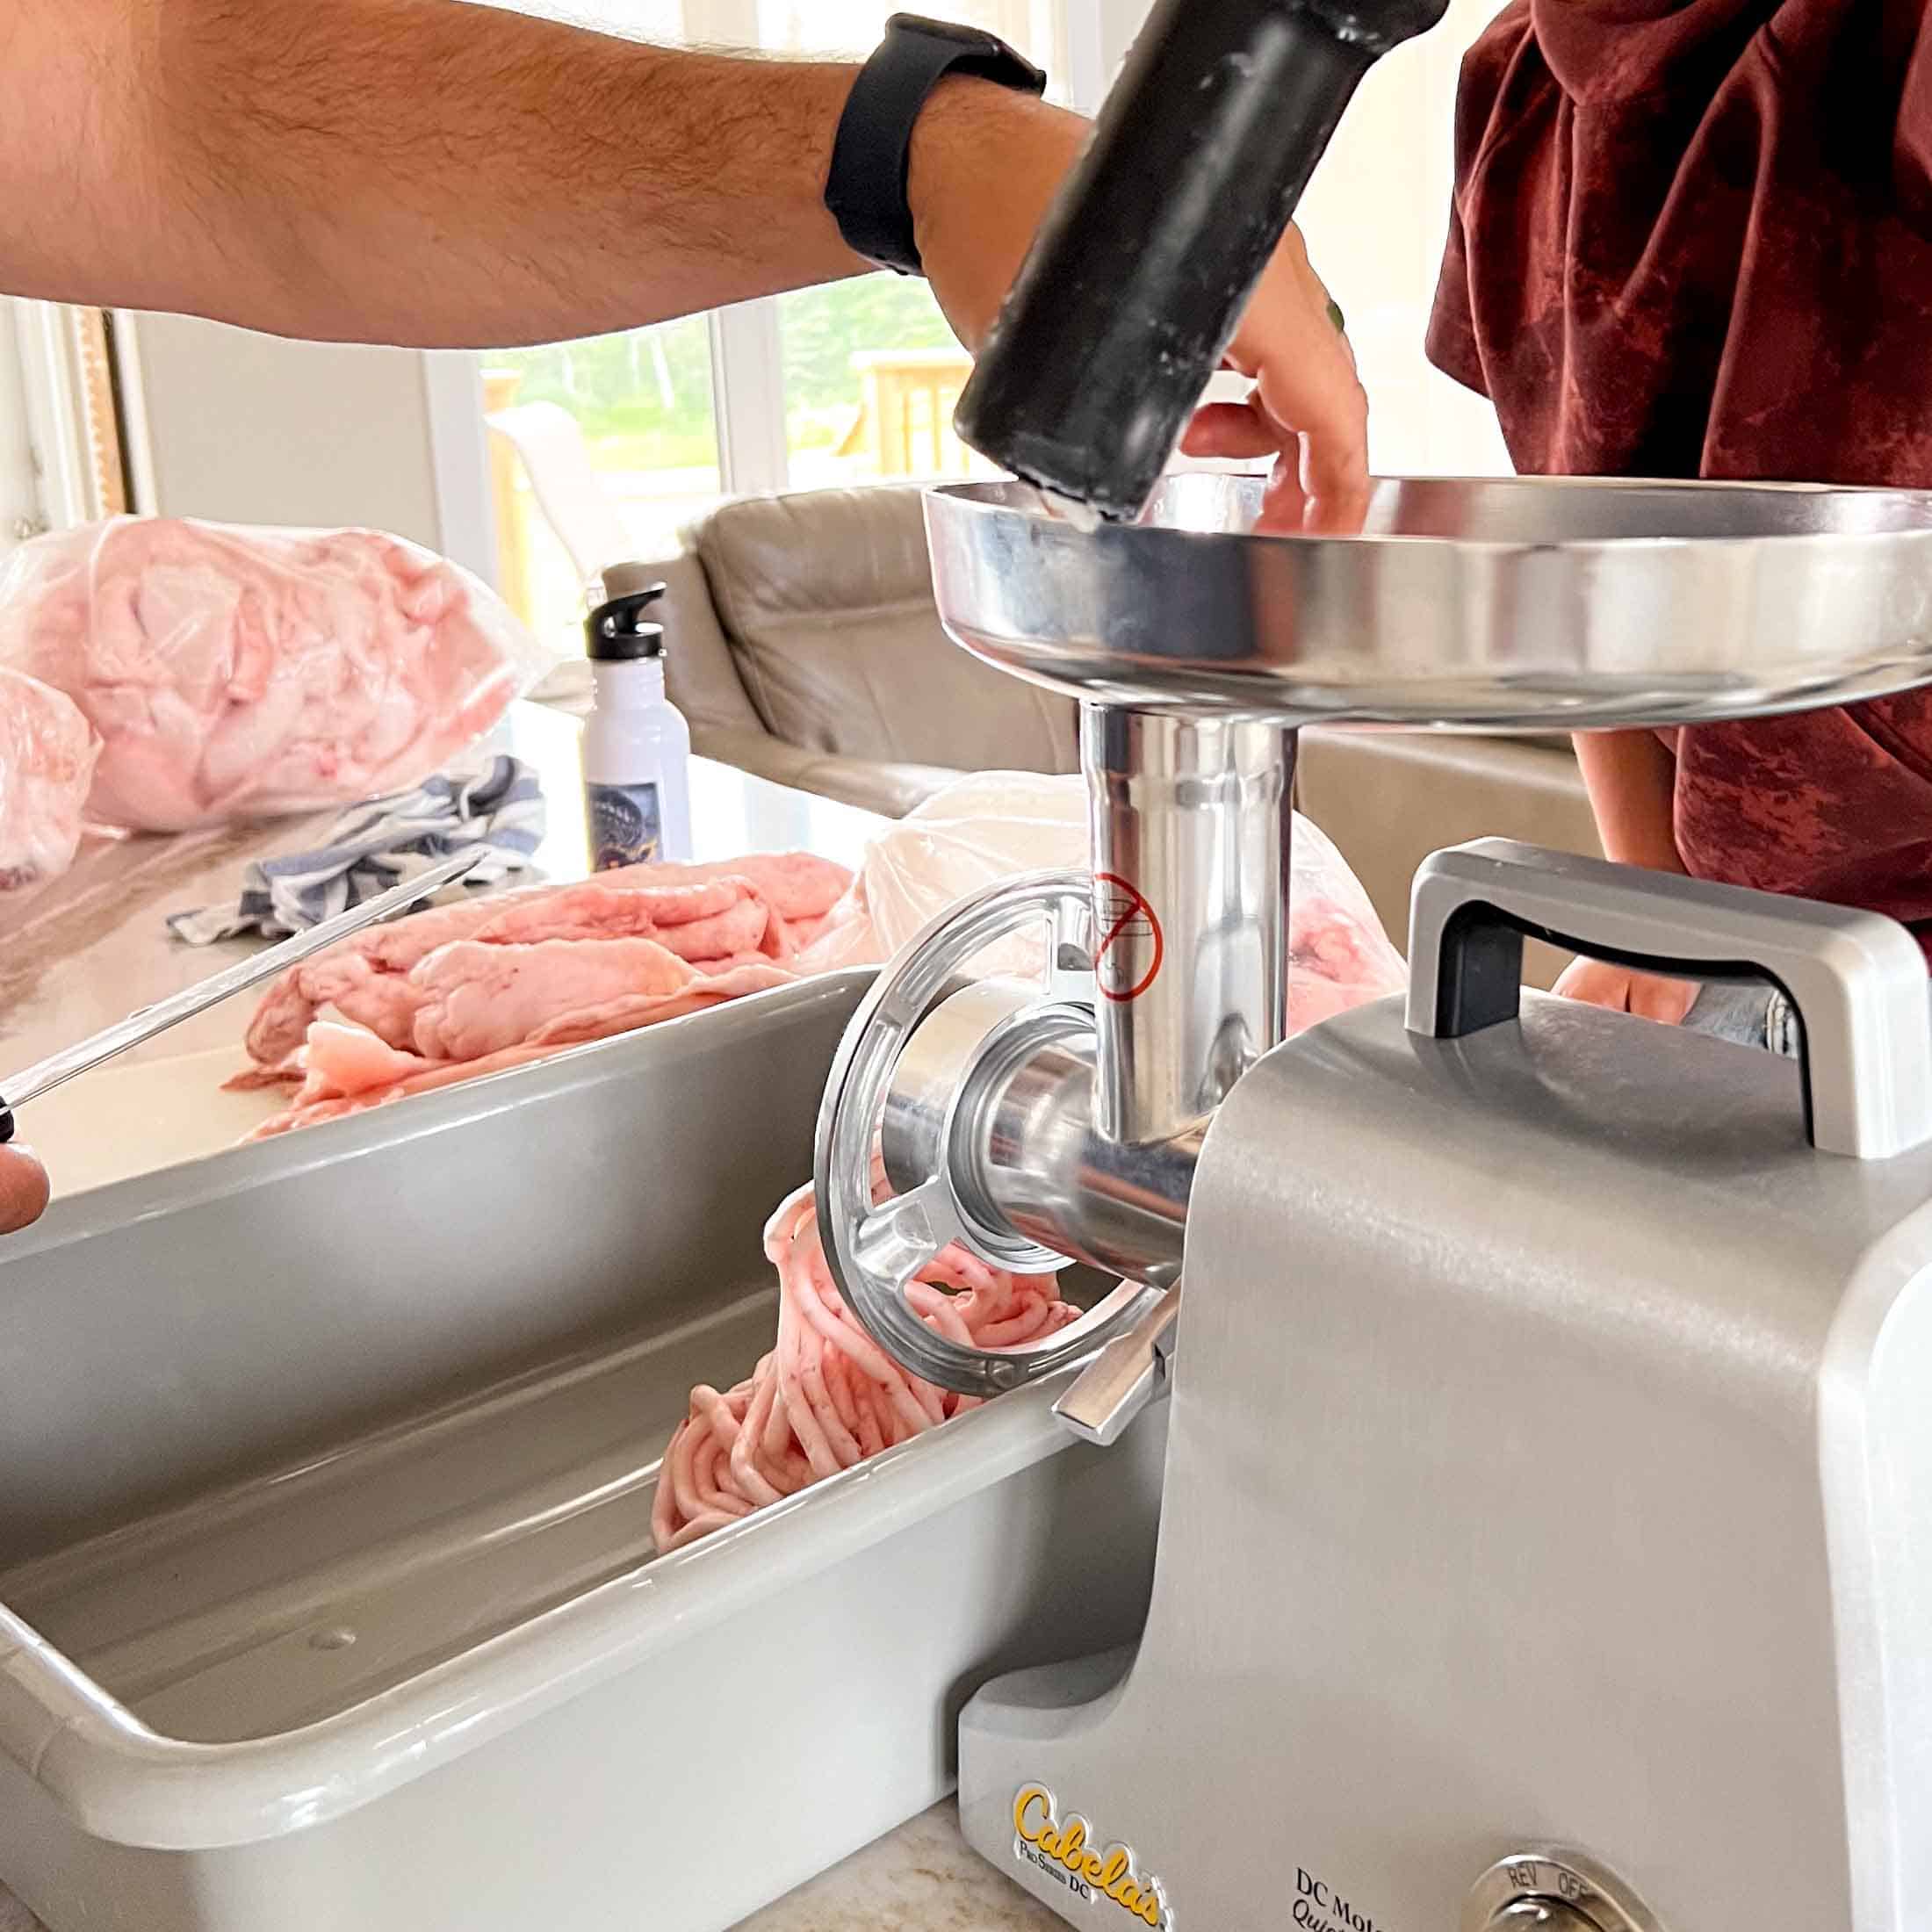 Lard being pushed into a meat grinder with a black plunger.